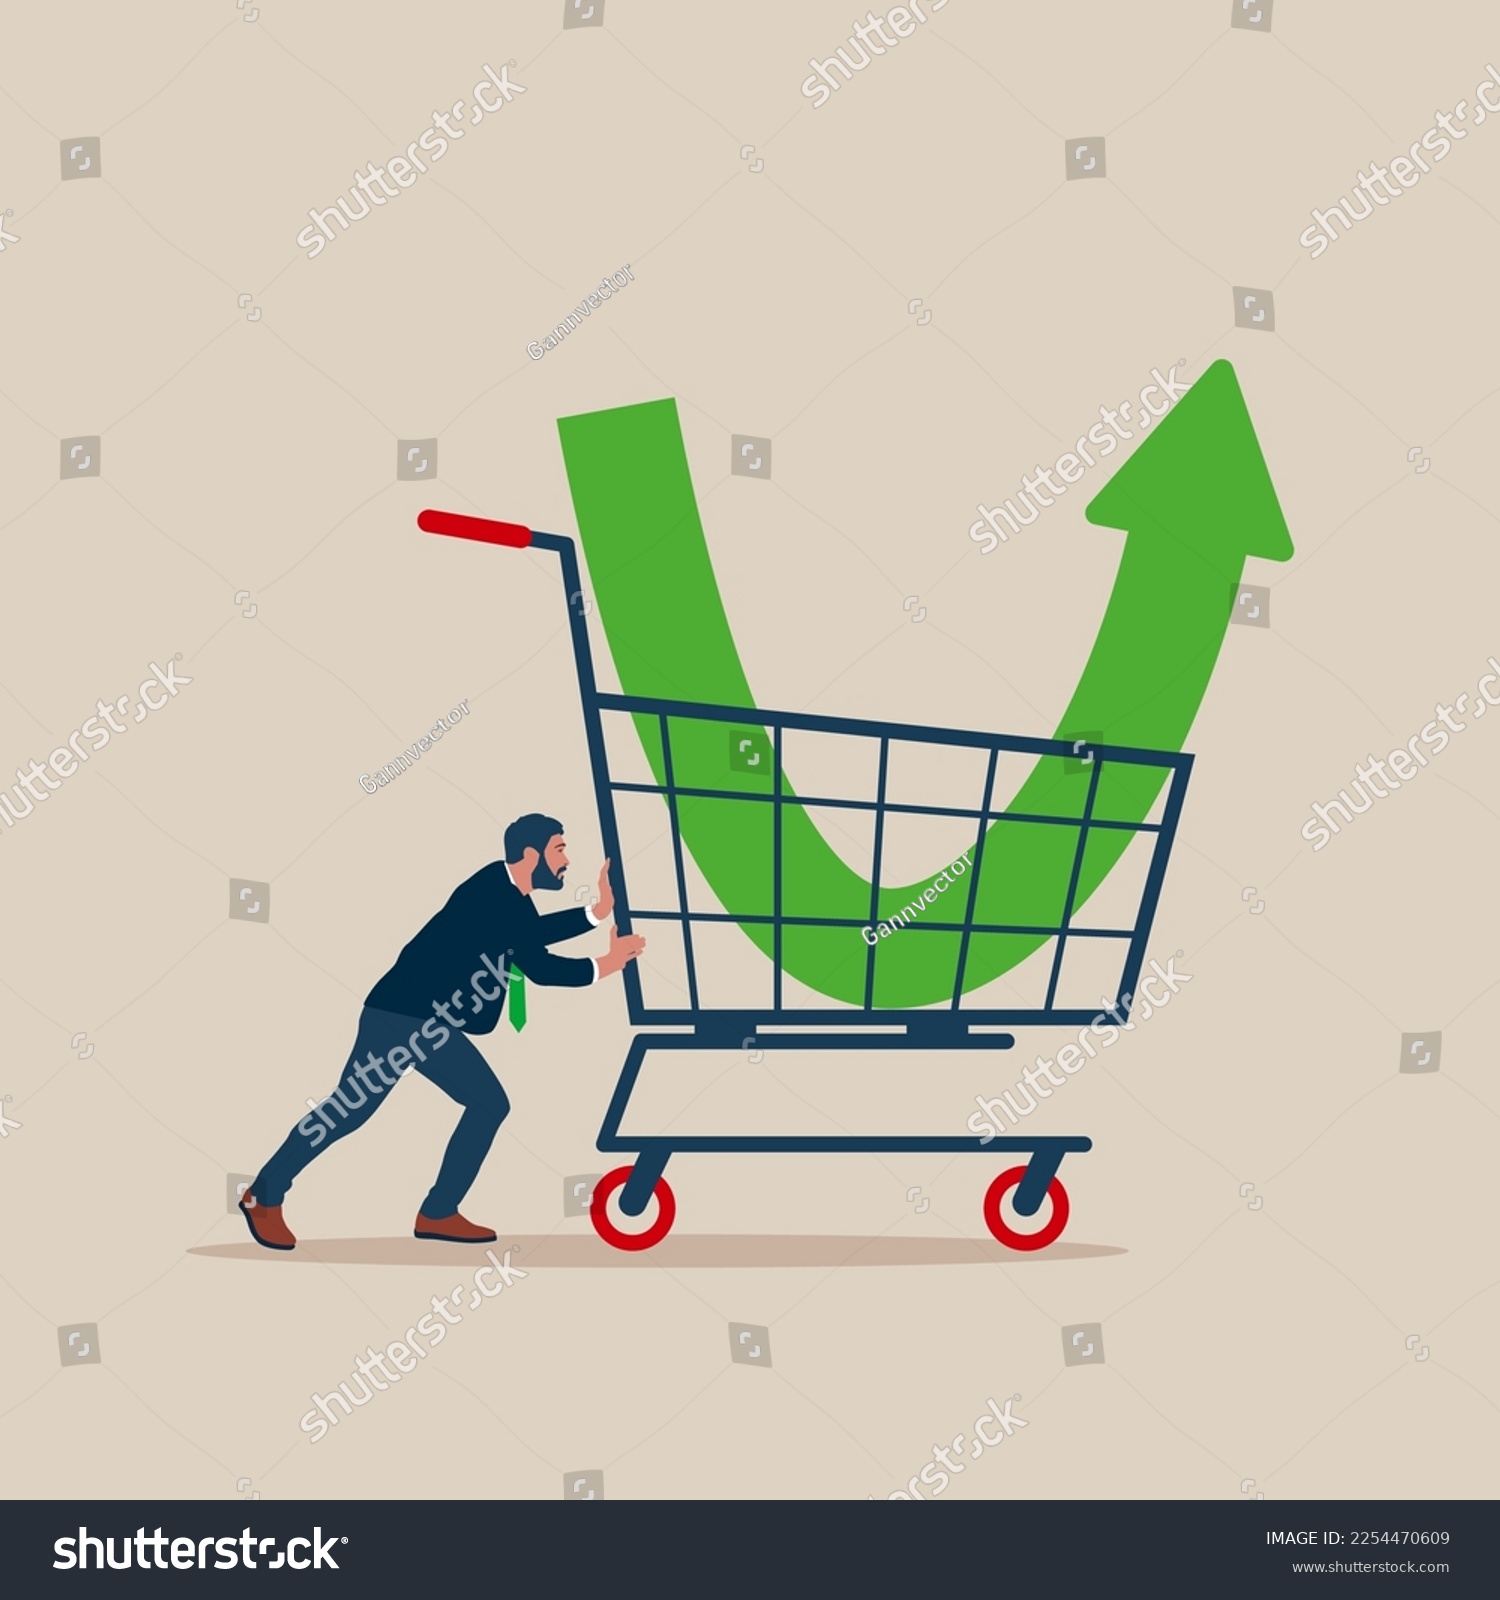 SVG of Businessman investor buy stock with down arrow graph in shopping cart. Purchase stock when price drop. Make profit from market collapse. Modern vector illustration in flat style. svg